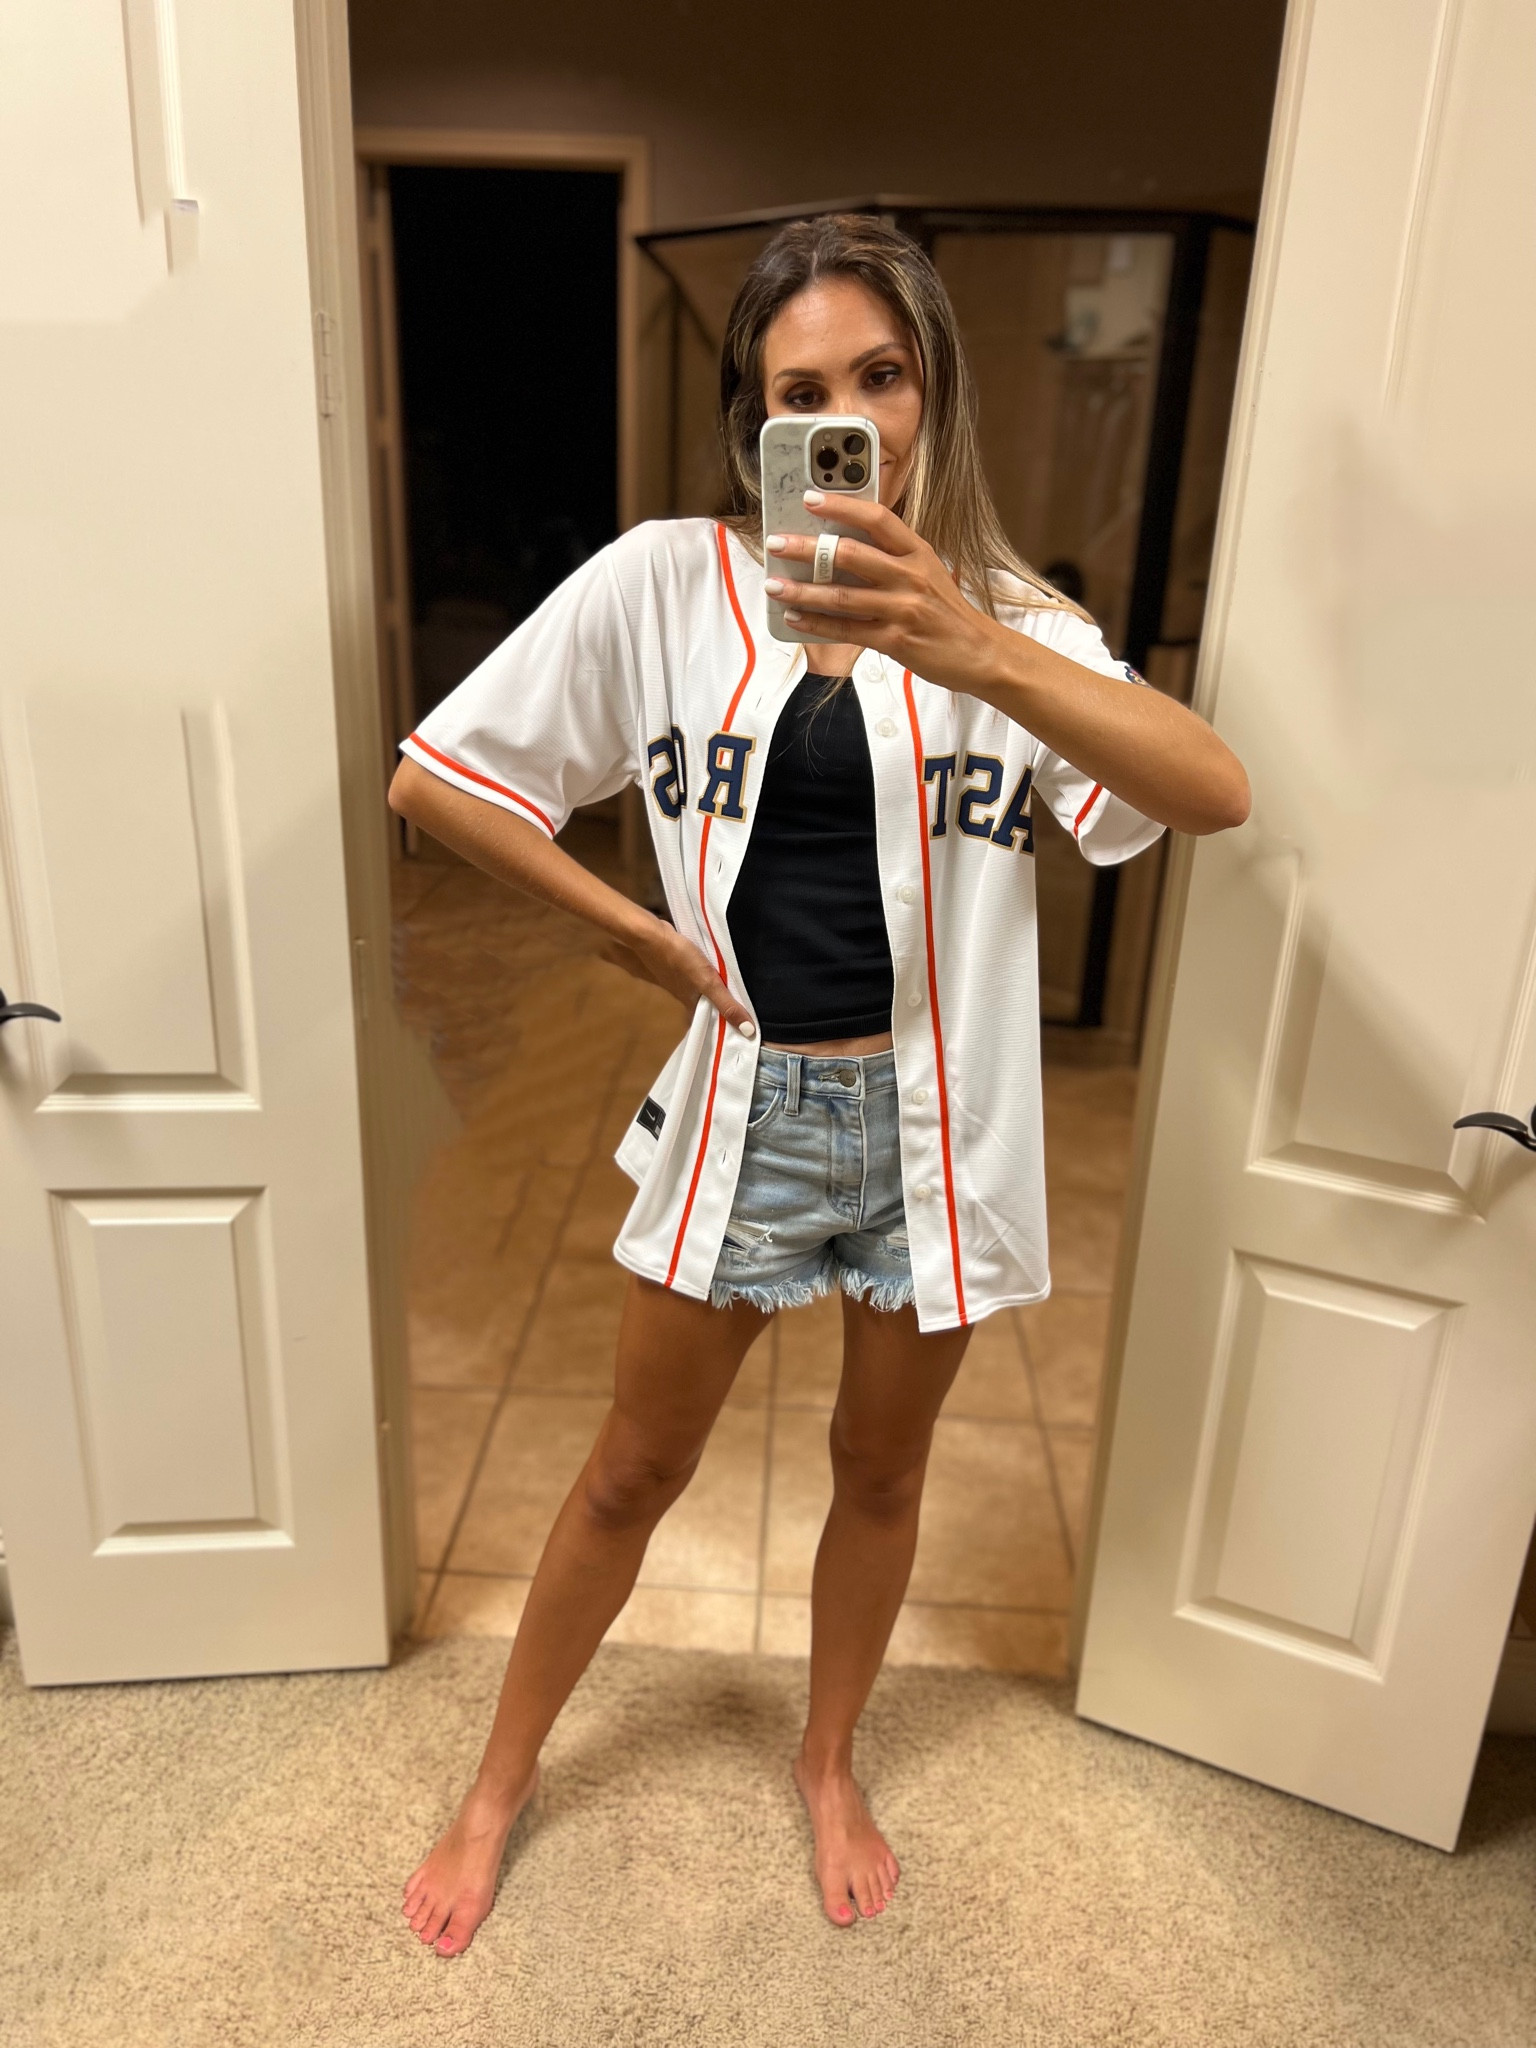 My Ootd Astros baseball jersey & high waste pants I love this